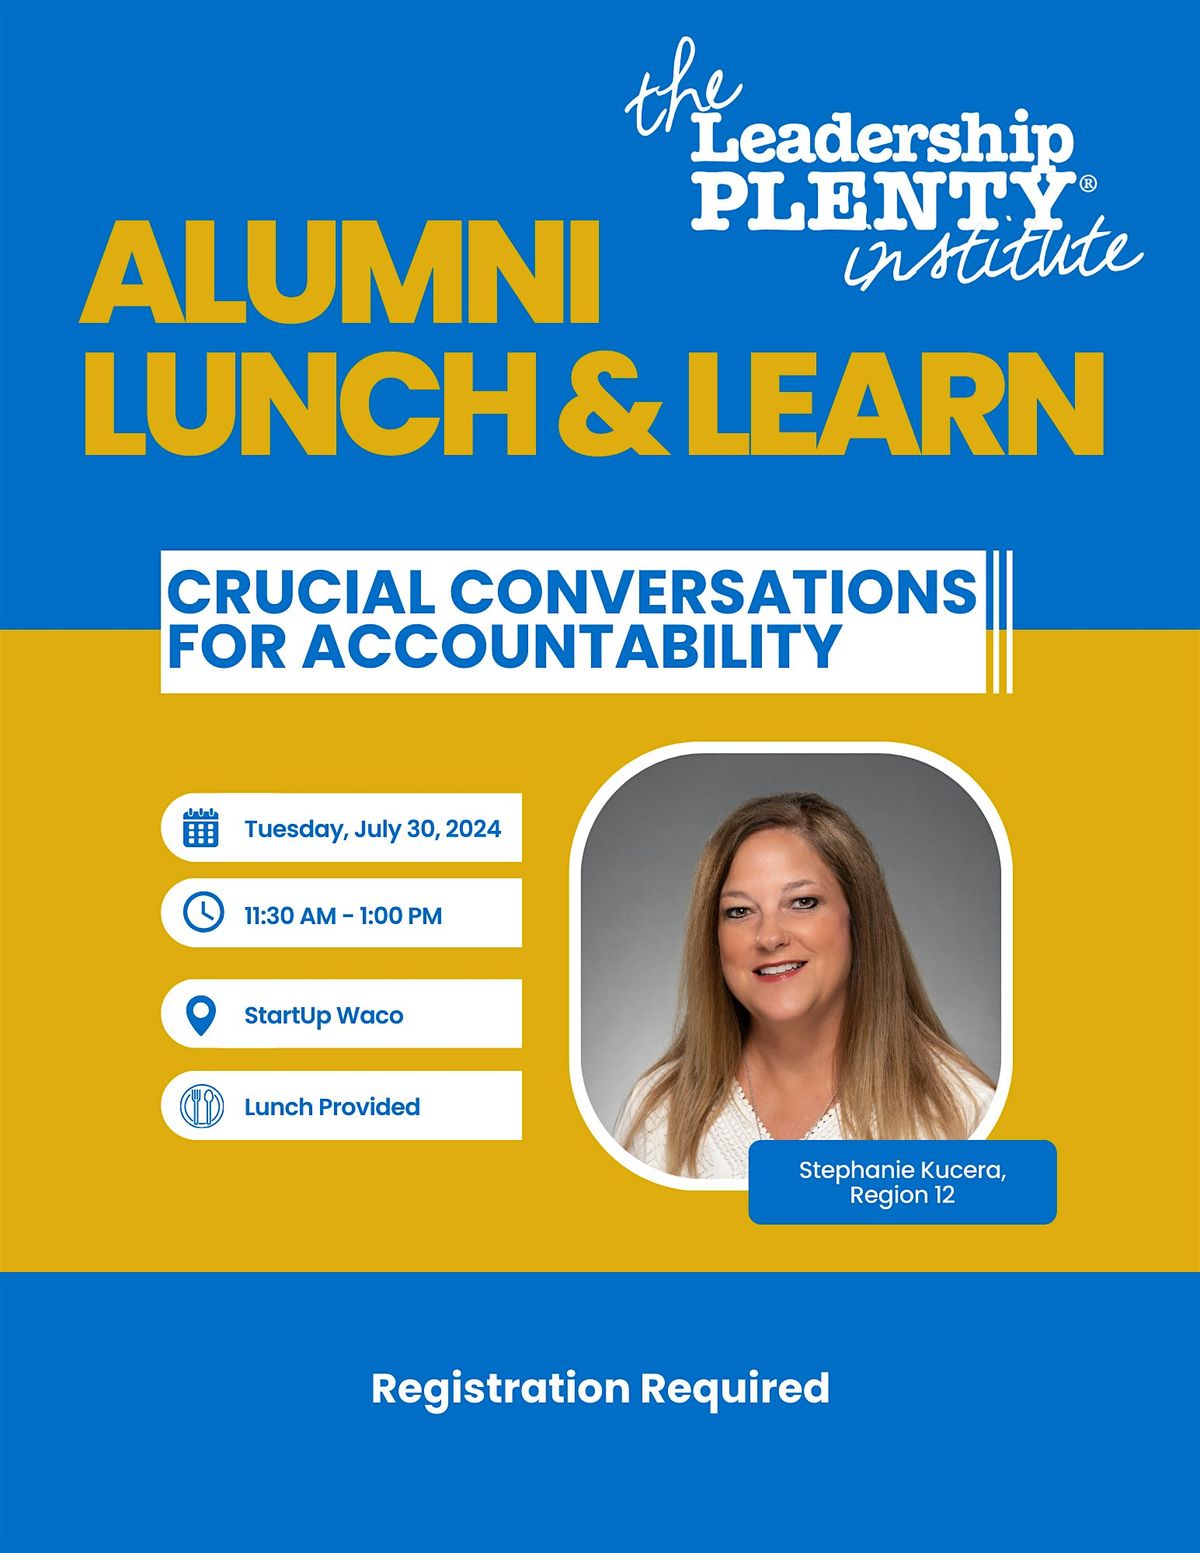 LPI Lunch & Learn: Crucial Conversations for Accountability